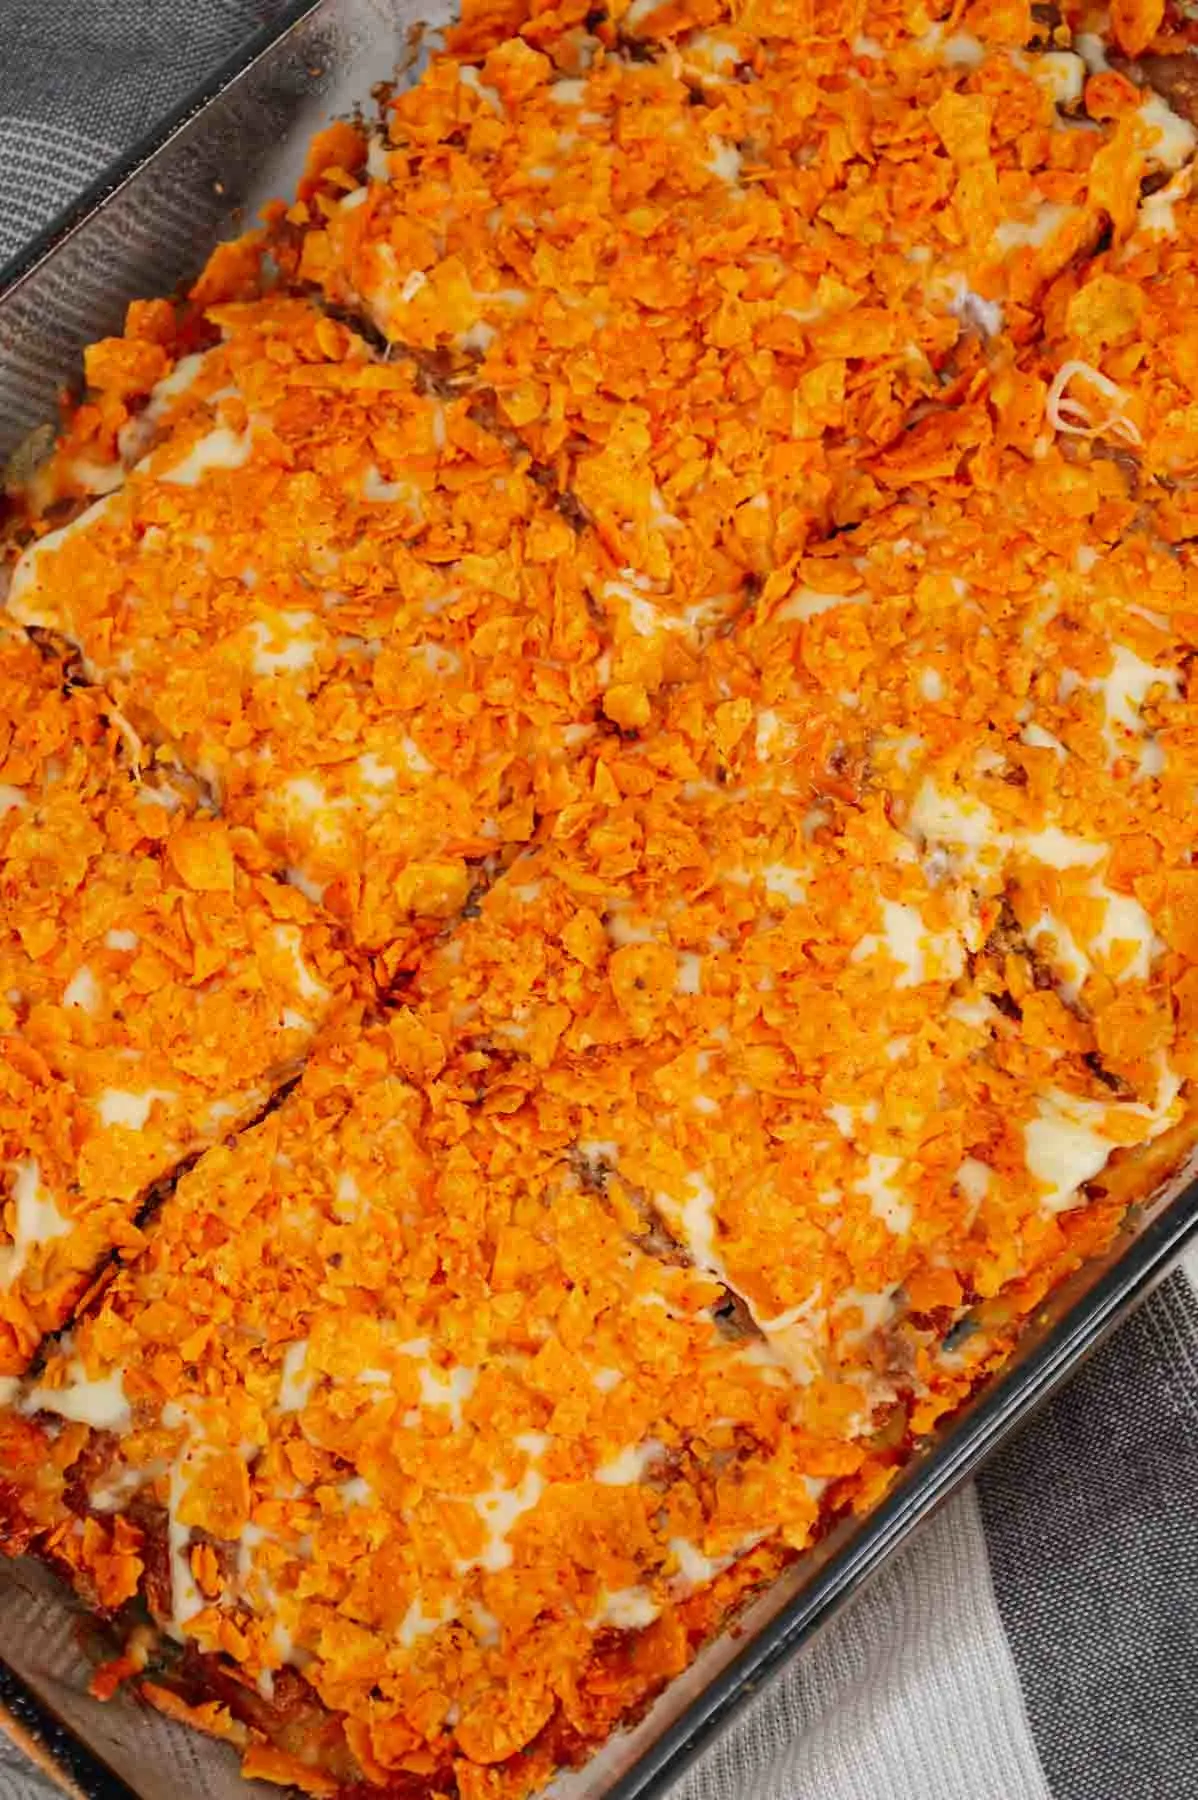 Dorito Meatloaf Casserole is a hearty dish with layers of ground beef and sausage meatloaf loaded with crushed Doritos, a cream cheese and ranch dressing filling and topped with cheese and more crushed Doritos.